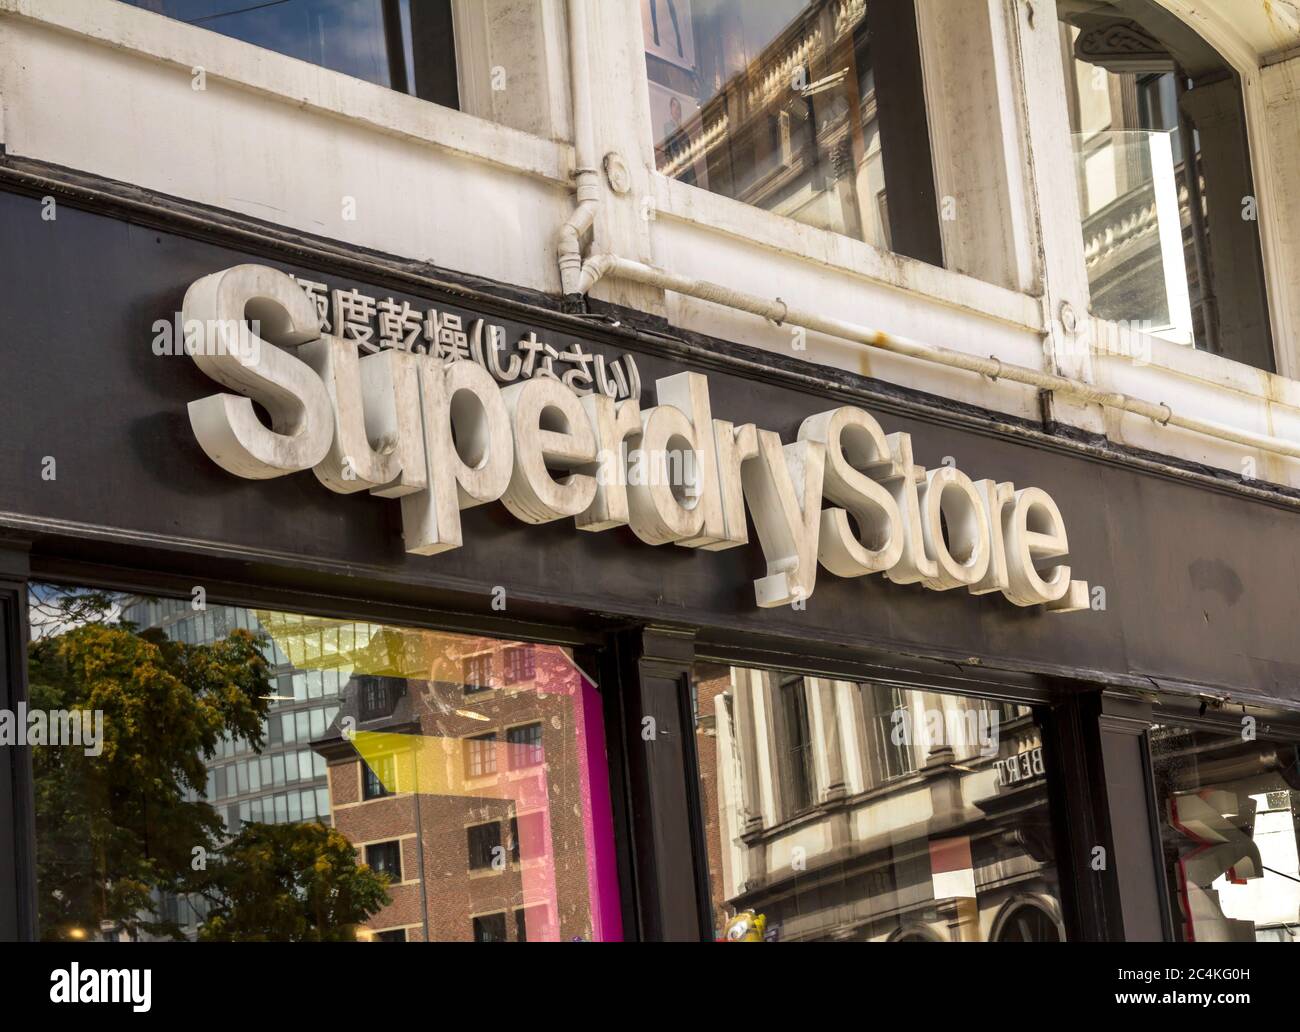 Brussels, BELGIUM - July 7, 2019: sign shop Superdry store British  international branded clothing company Stock Photo - Alamy